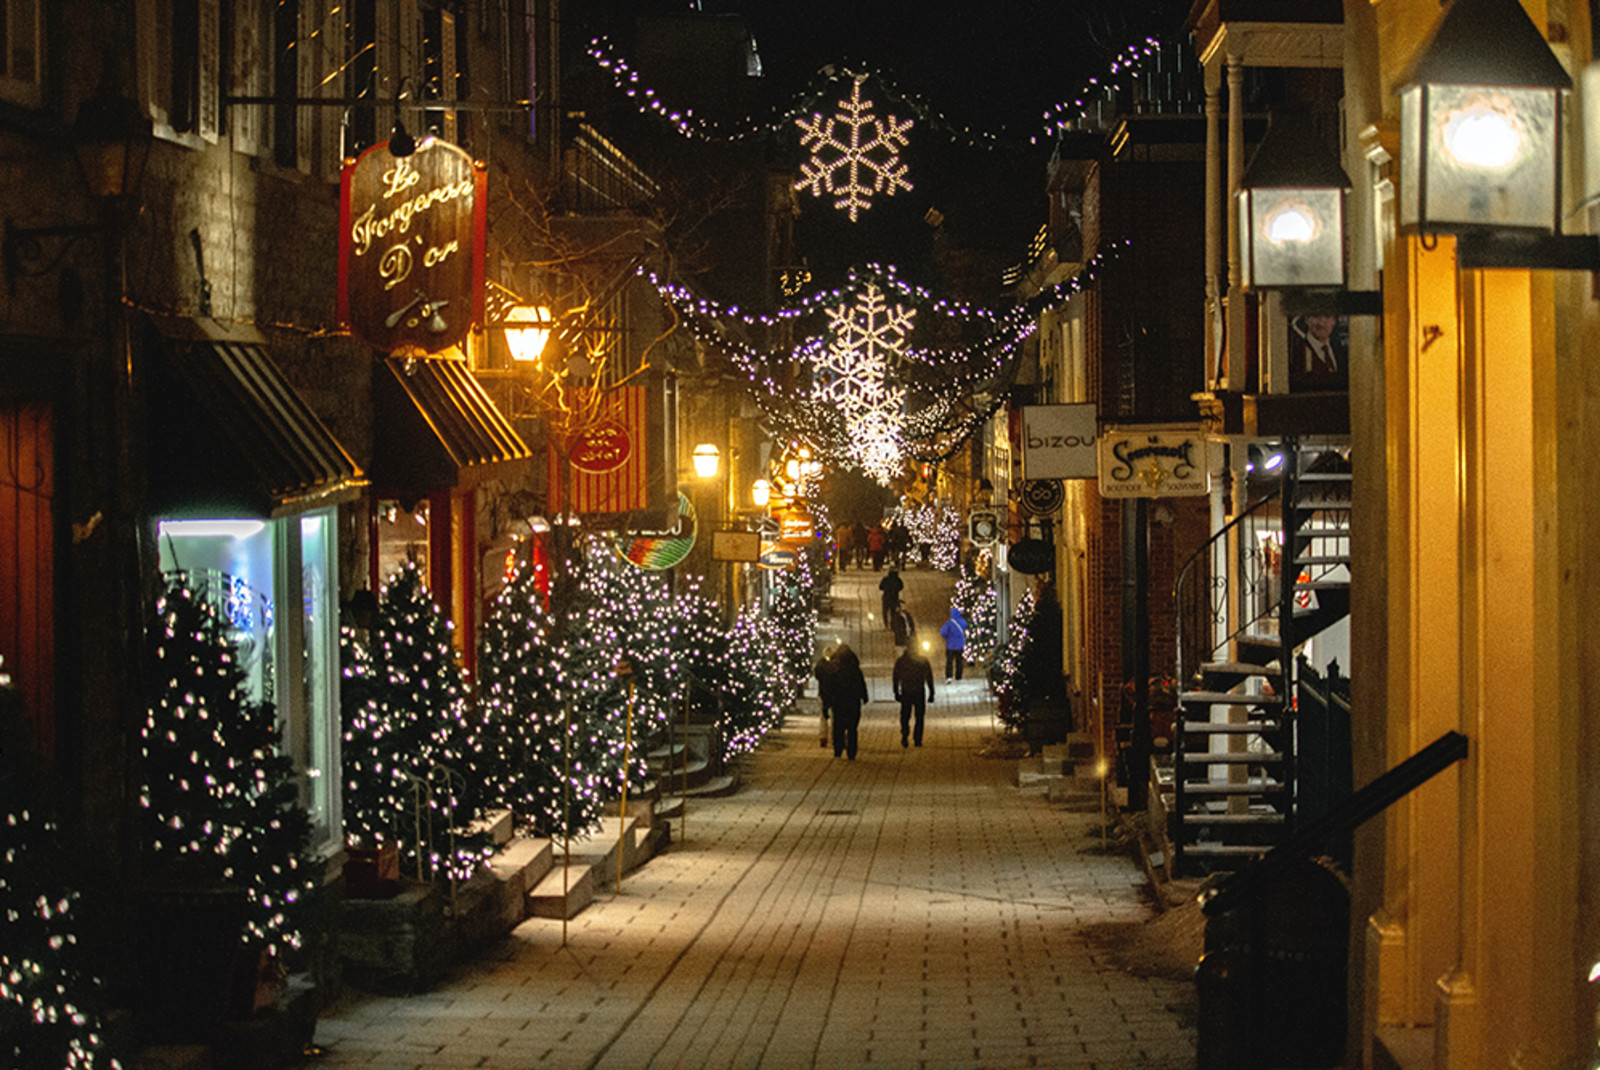 quebec city in Canada with holiday trees and lights in the cobblestone streets